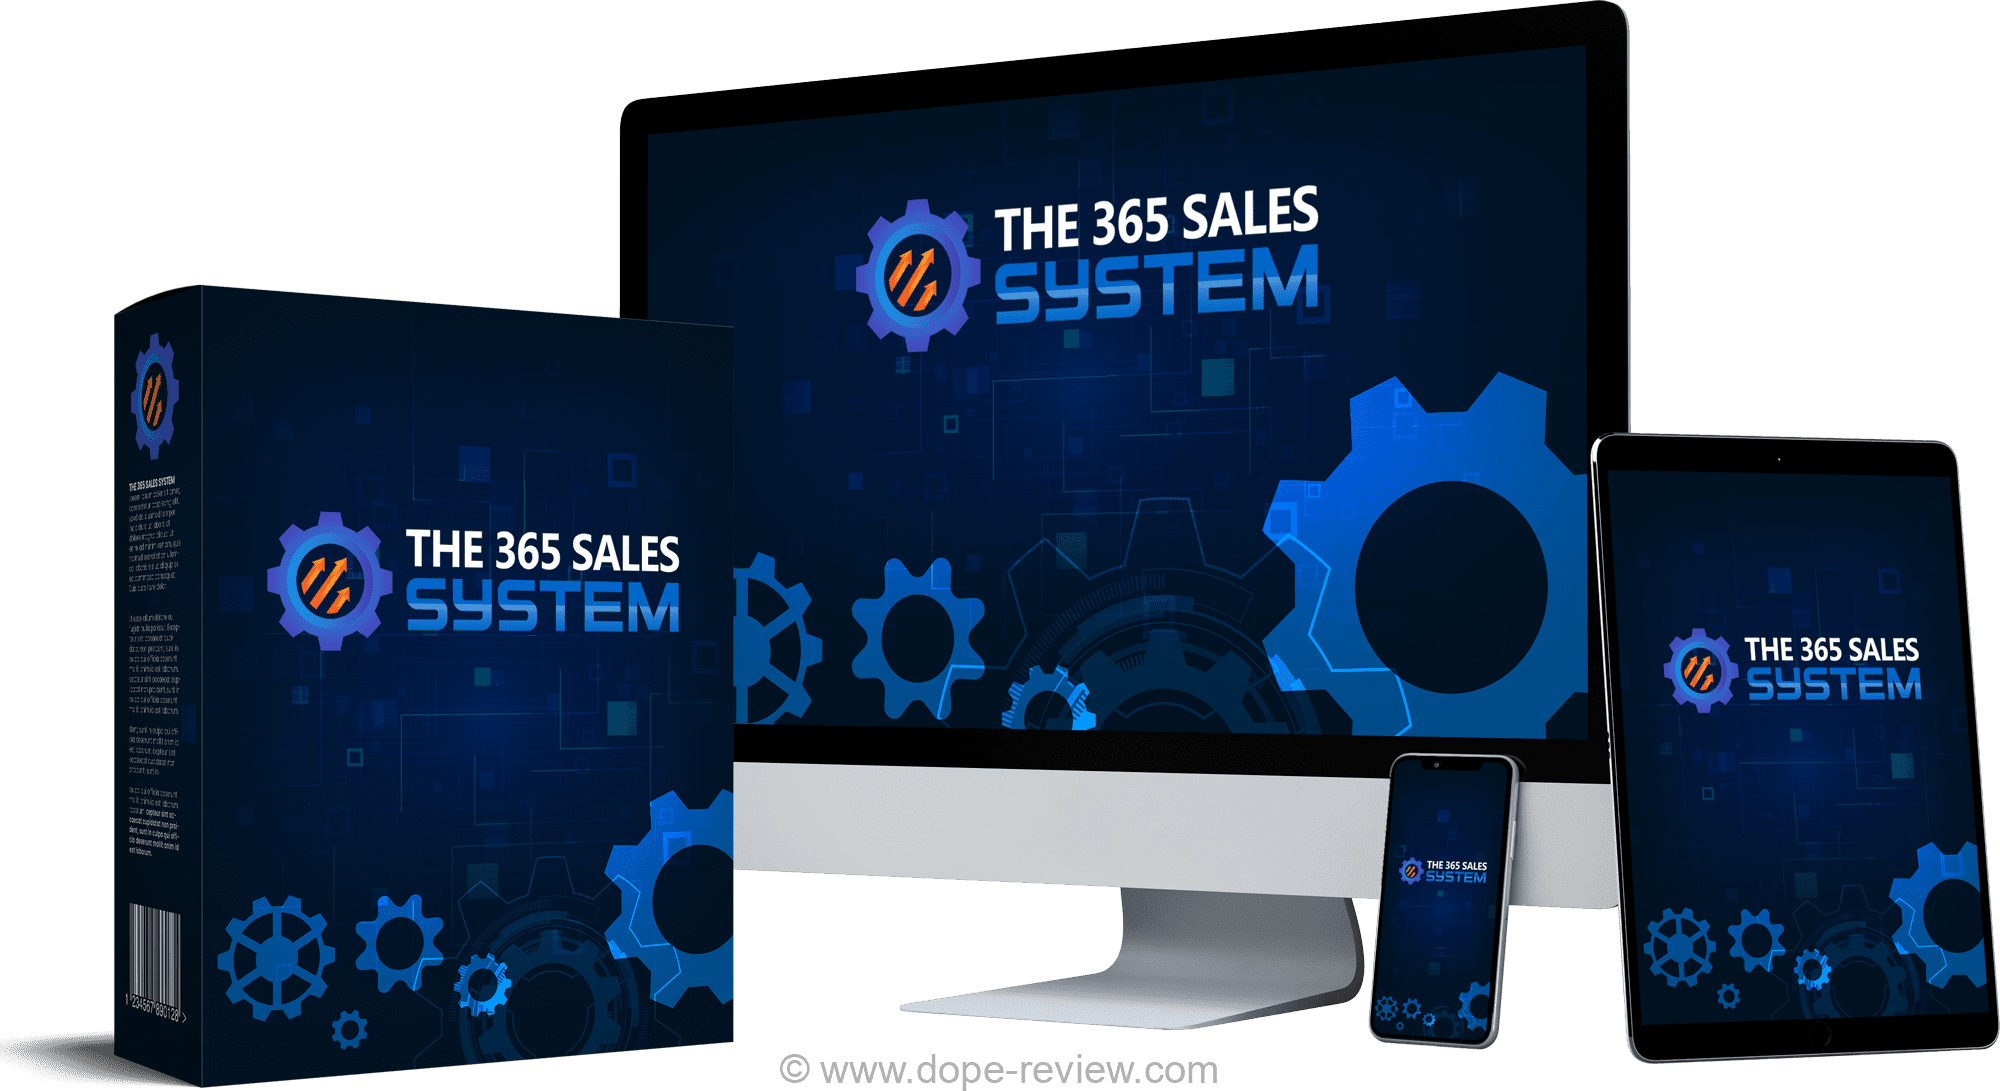 The 365 Sales System